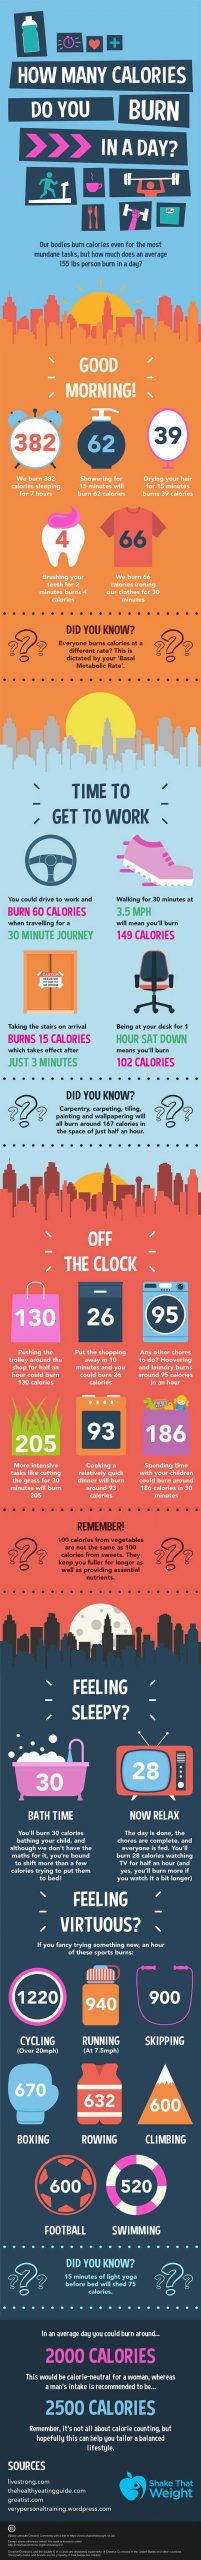 How Many Calories Do You Burn a Day? [Infographic] - Best Infographics